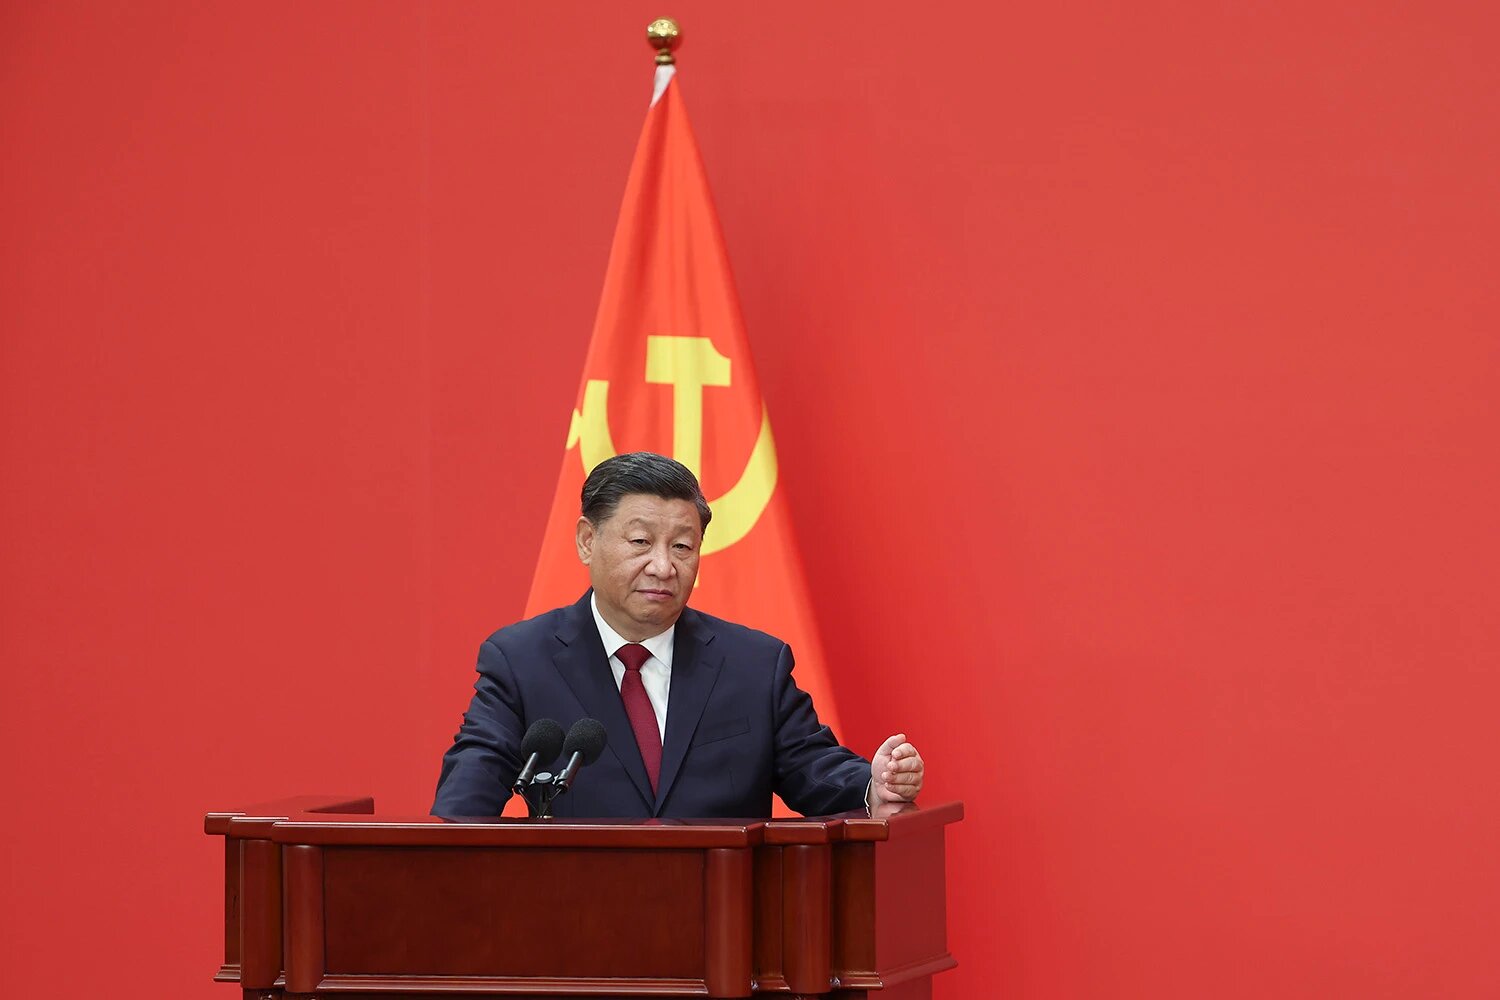 China's Parliament Endorses Xi Jinping For Third Term As President